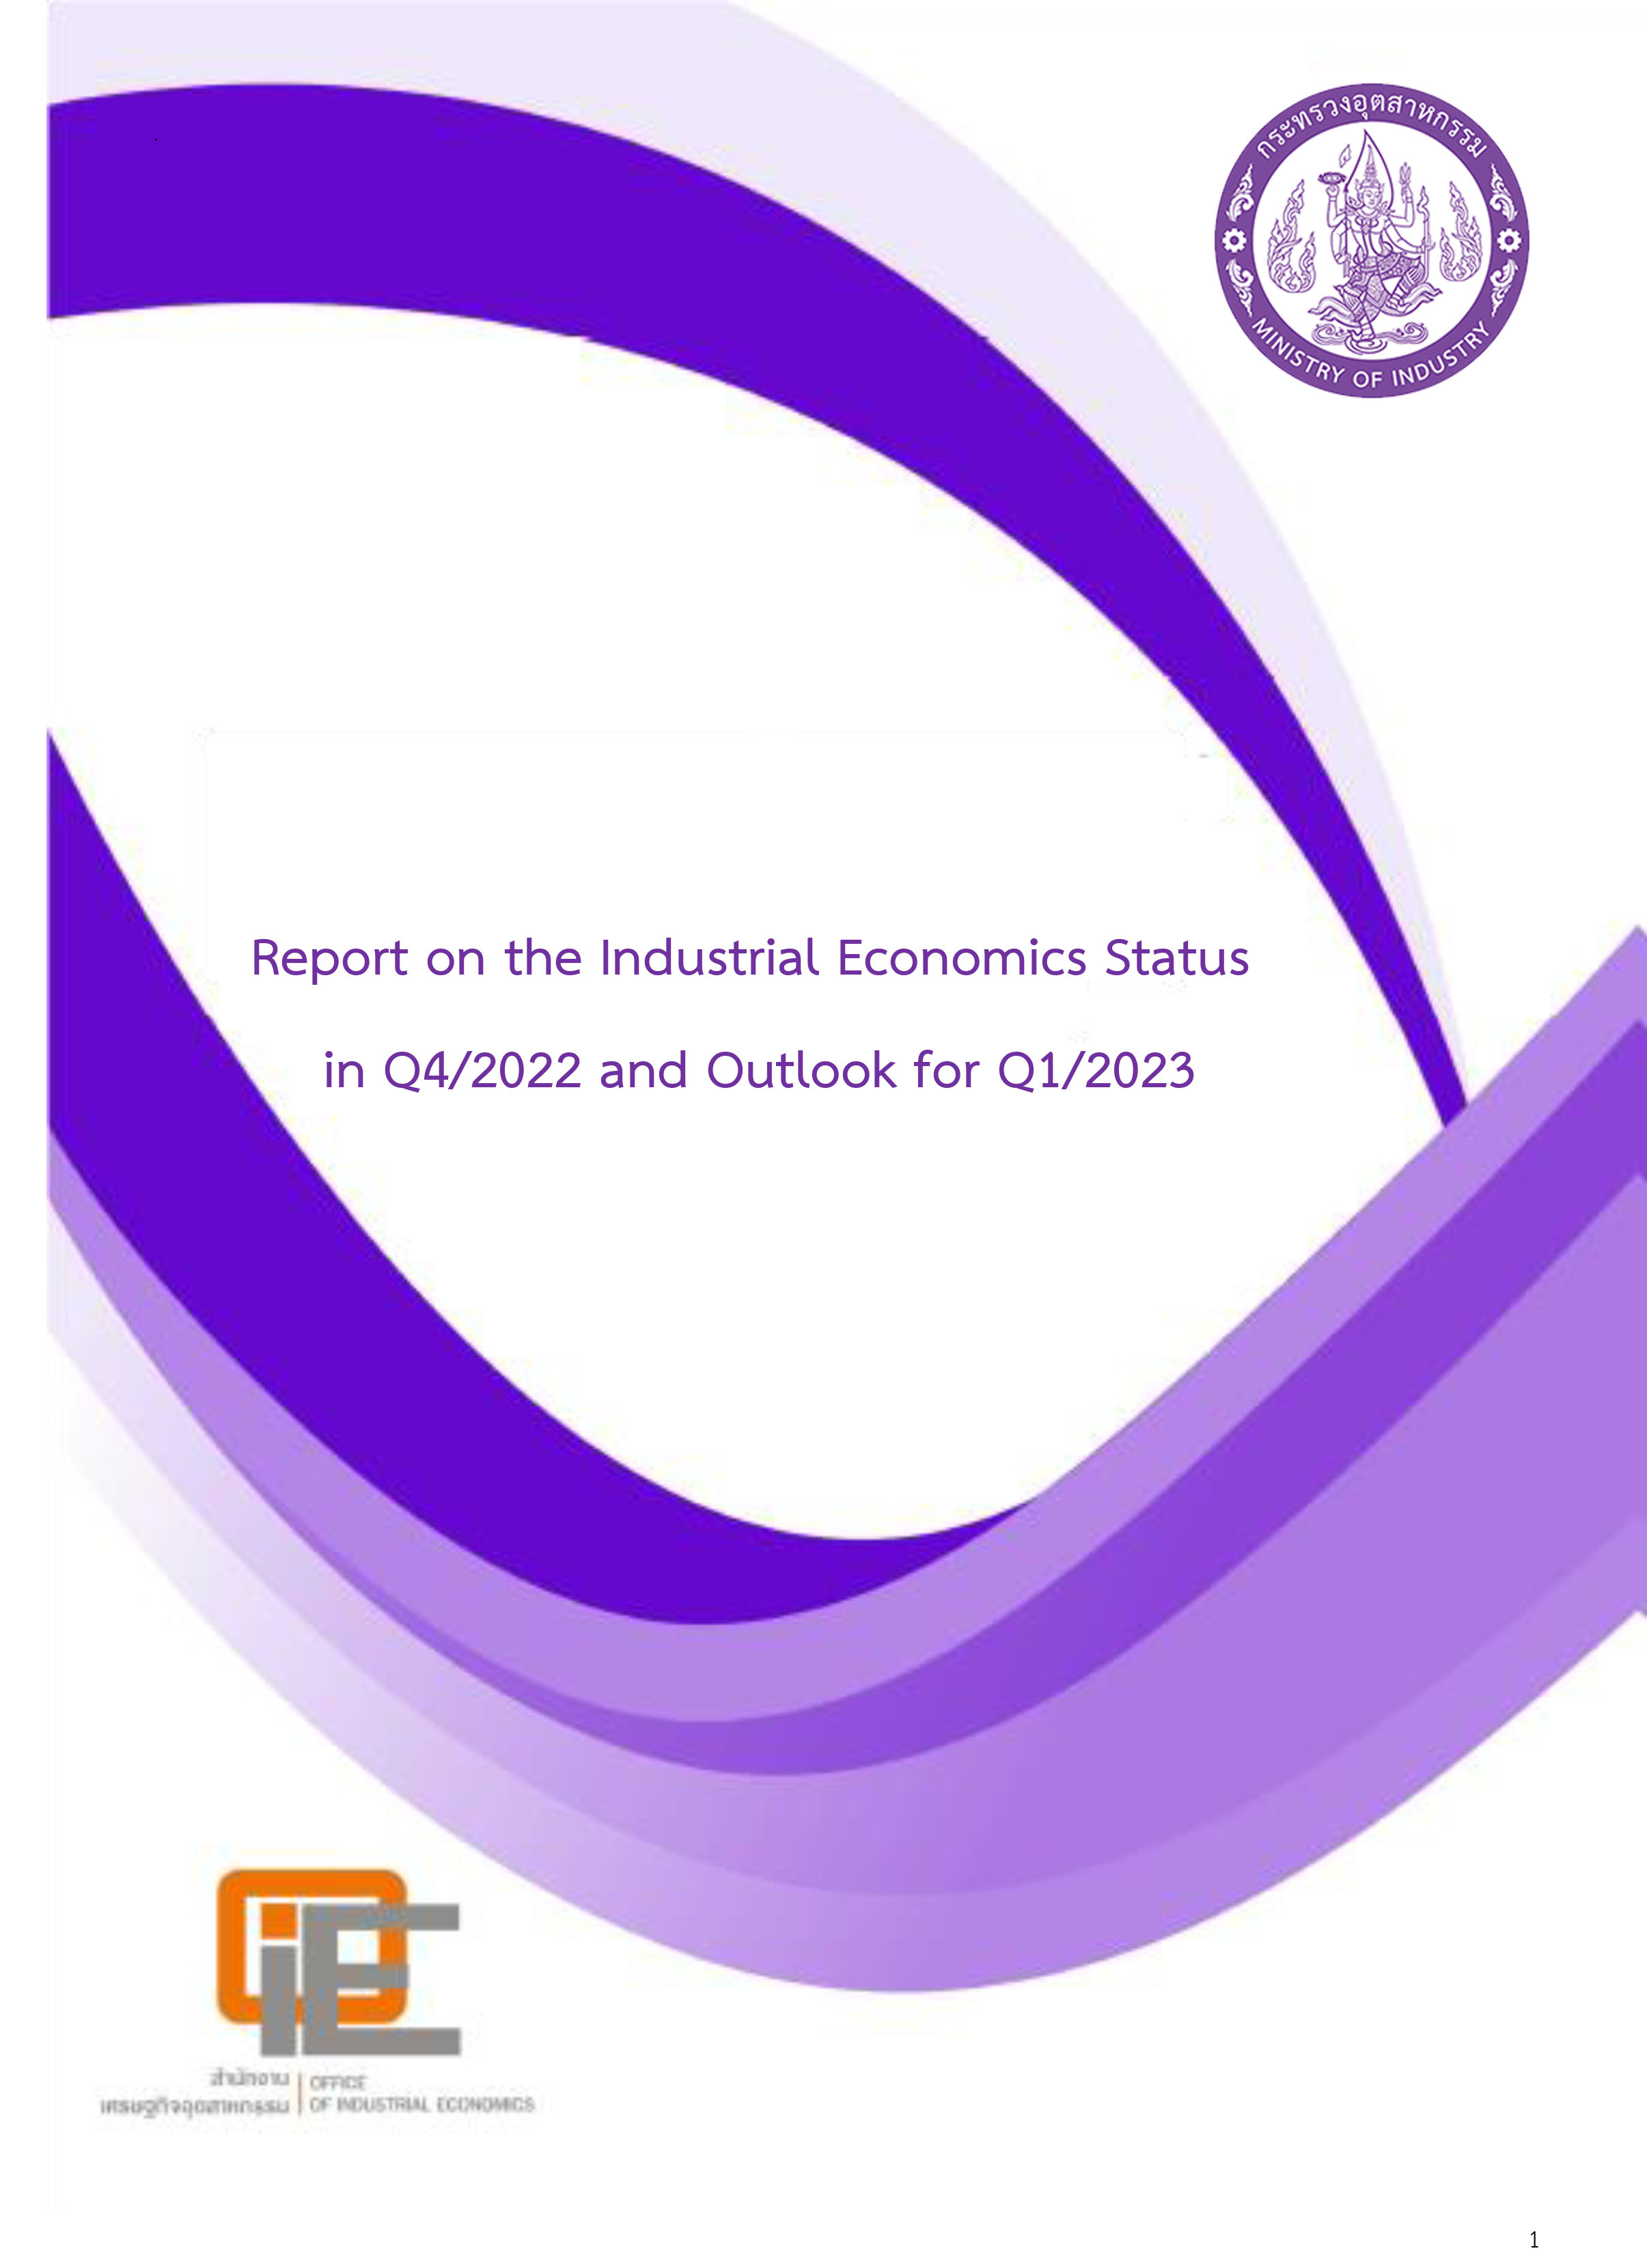 Report on the Industrial Economics Status in Q4/2022 and Outlook for Q1/2023